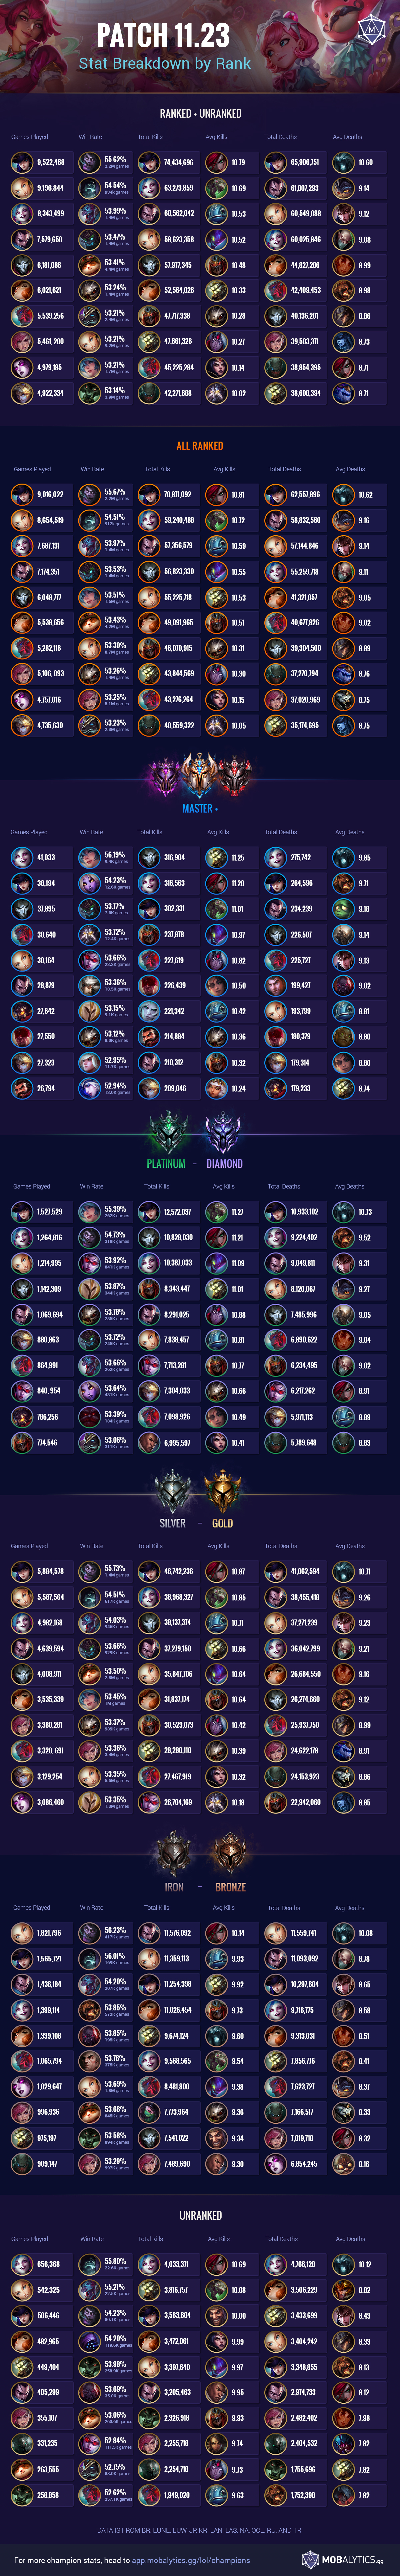 Patch 11.23 Rewind: Top 10 Champ Stats by Rank (Kills, Win Rate, Deaths,  and More) - Mobalytics